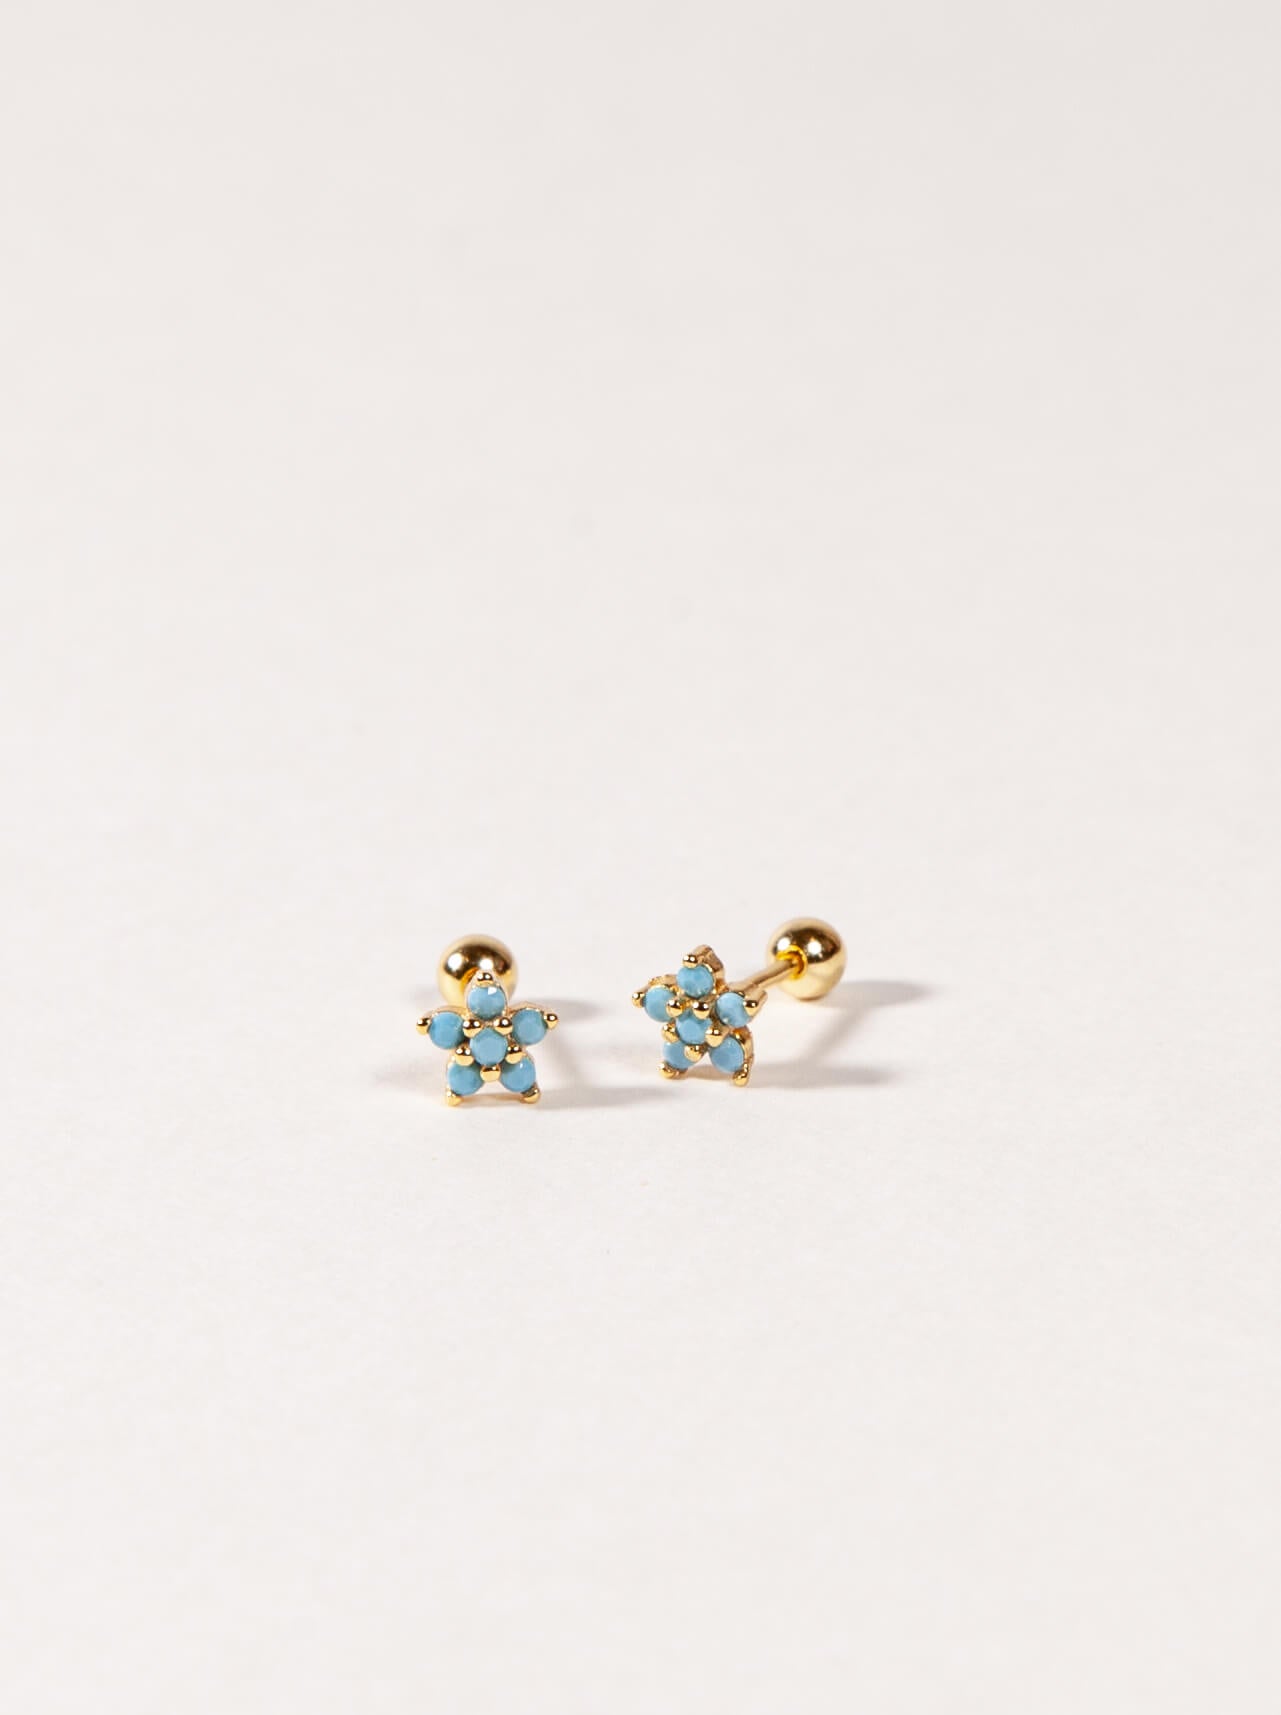 Turquoise Flower Studs with Ball Backs